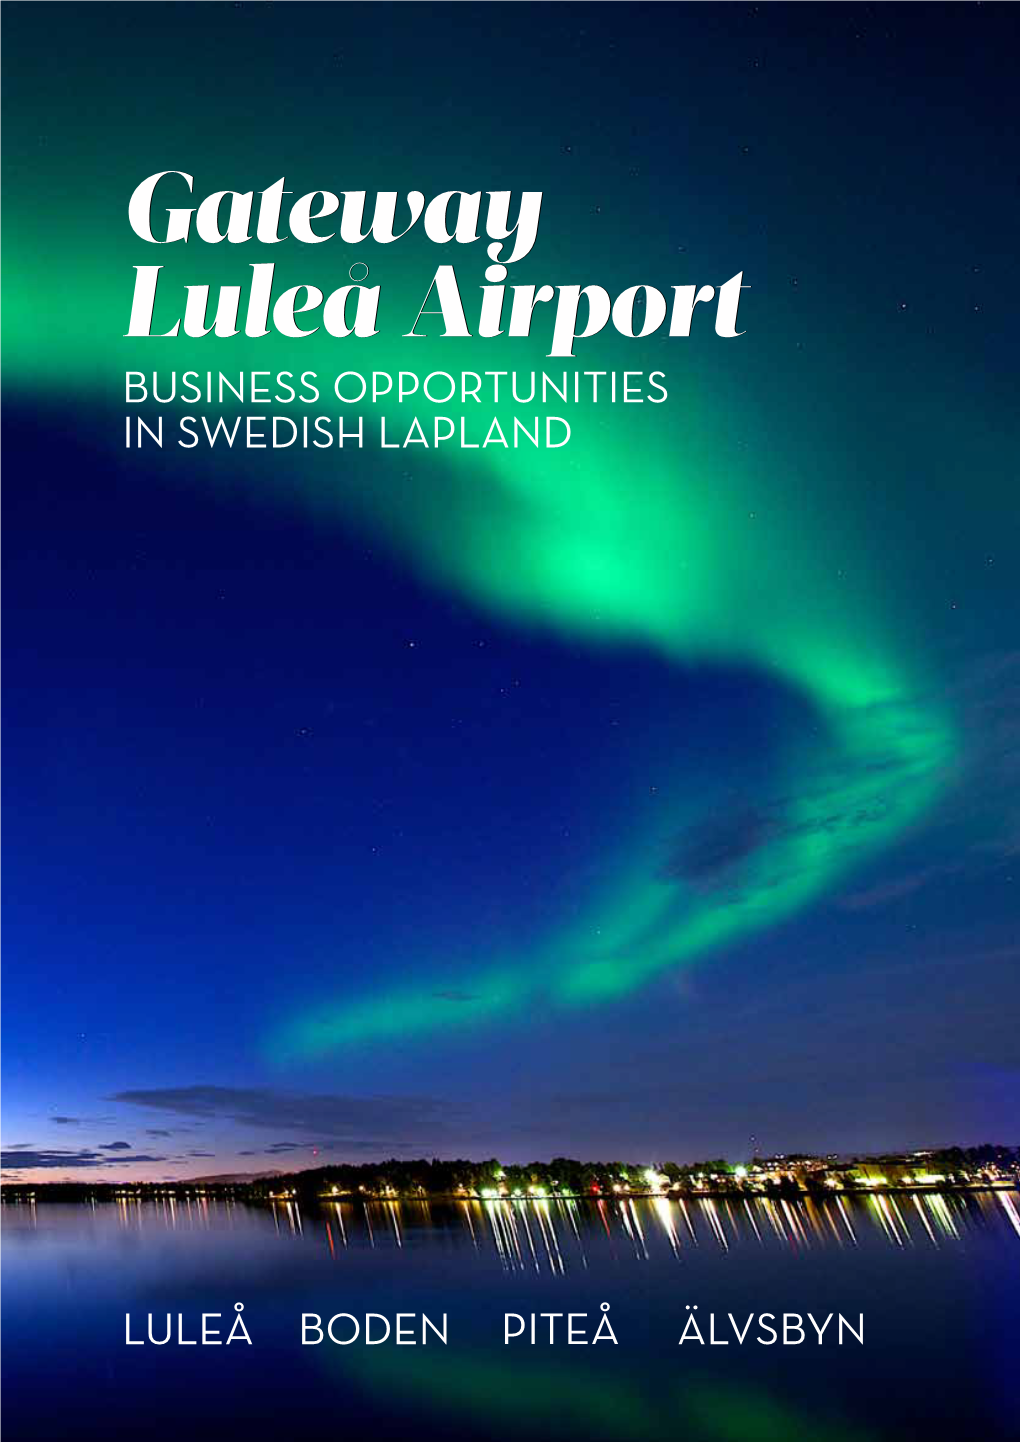 Luleå Airport Business Opportunities in Swedish Lapland